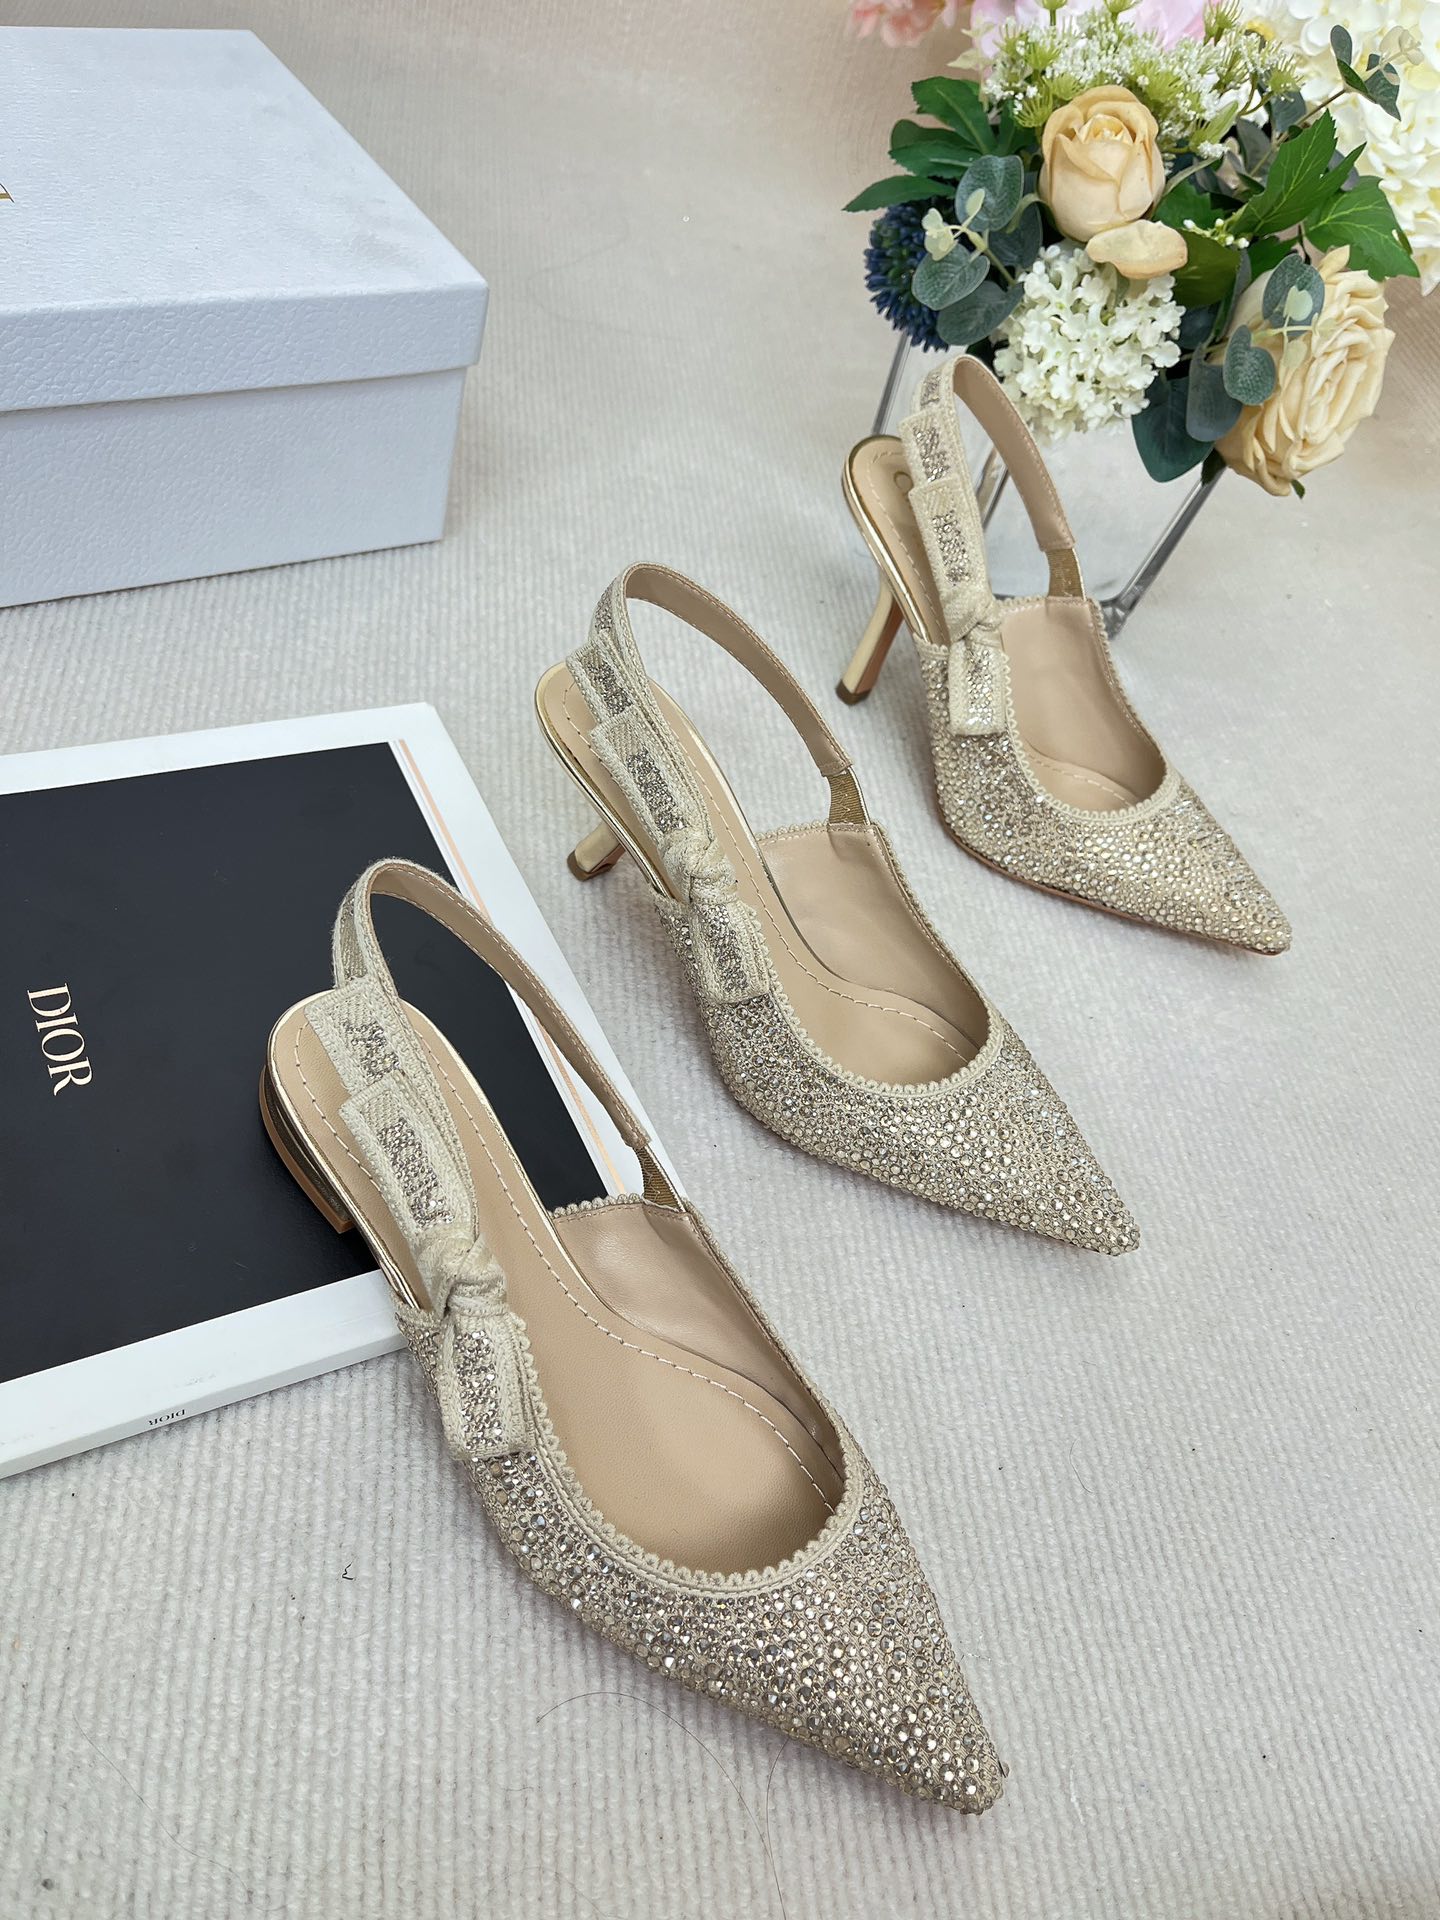 Dior Shoes High Heel Pumps Gold Embroidery Cotton